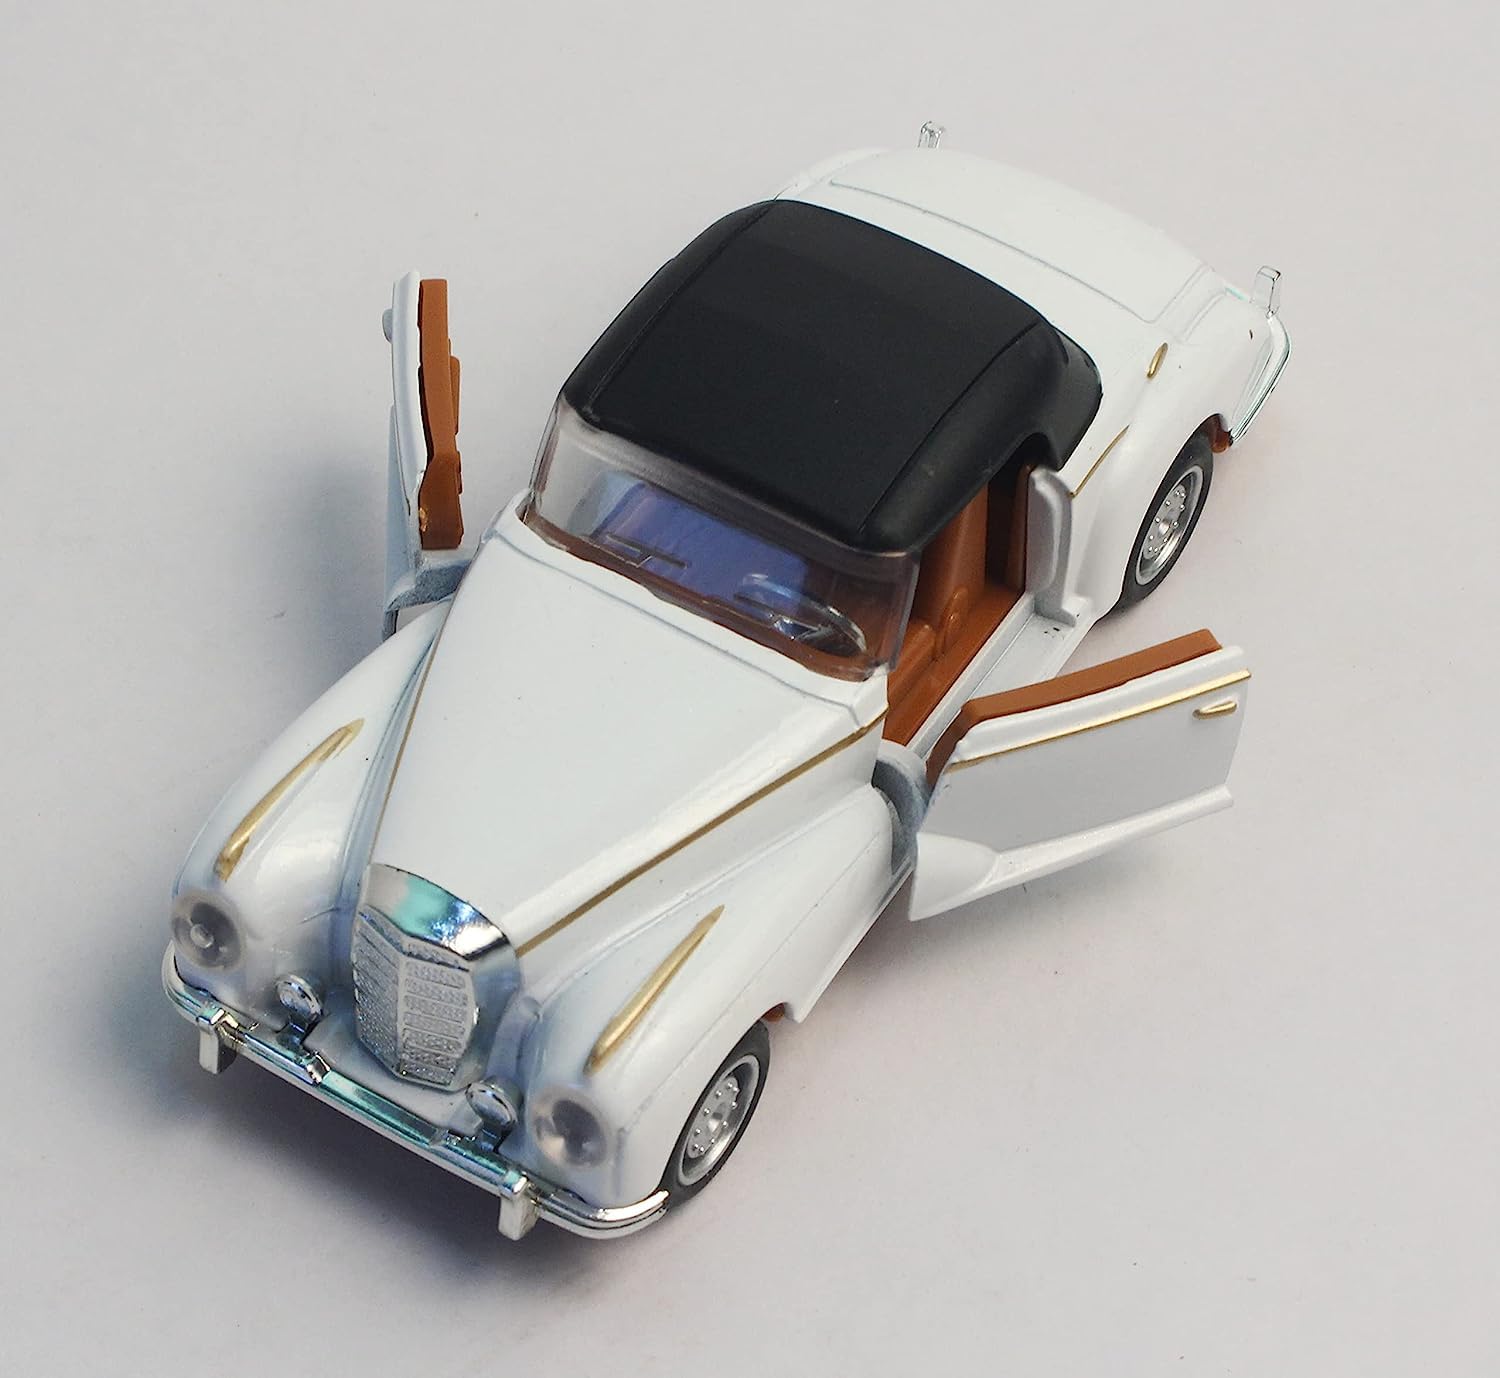 Classic Cars 1:32 Scale Die Cast Metal cars White With Roof